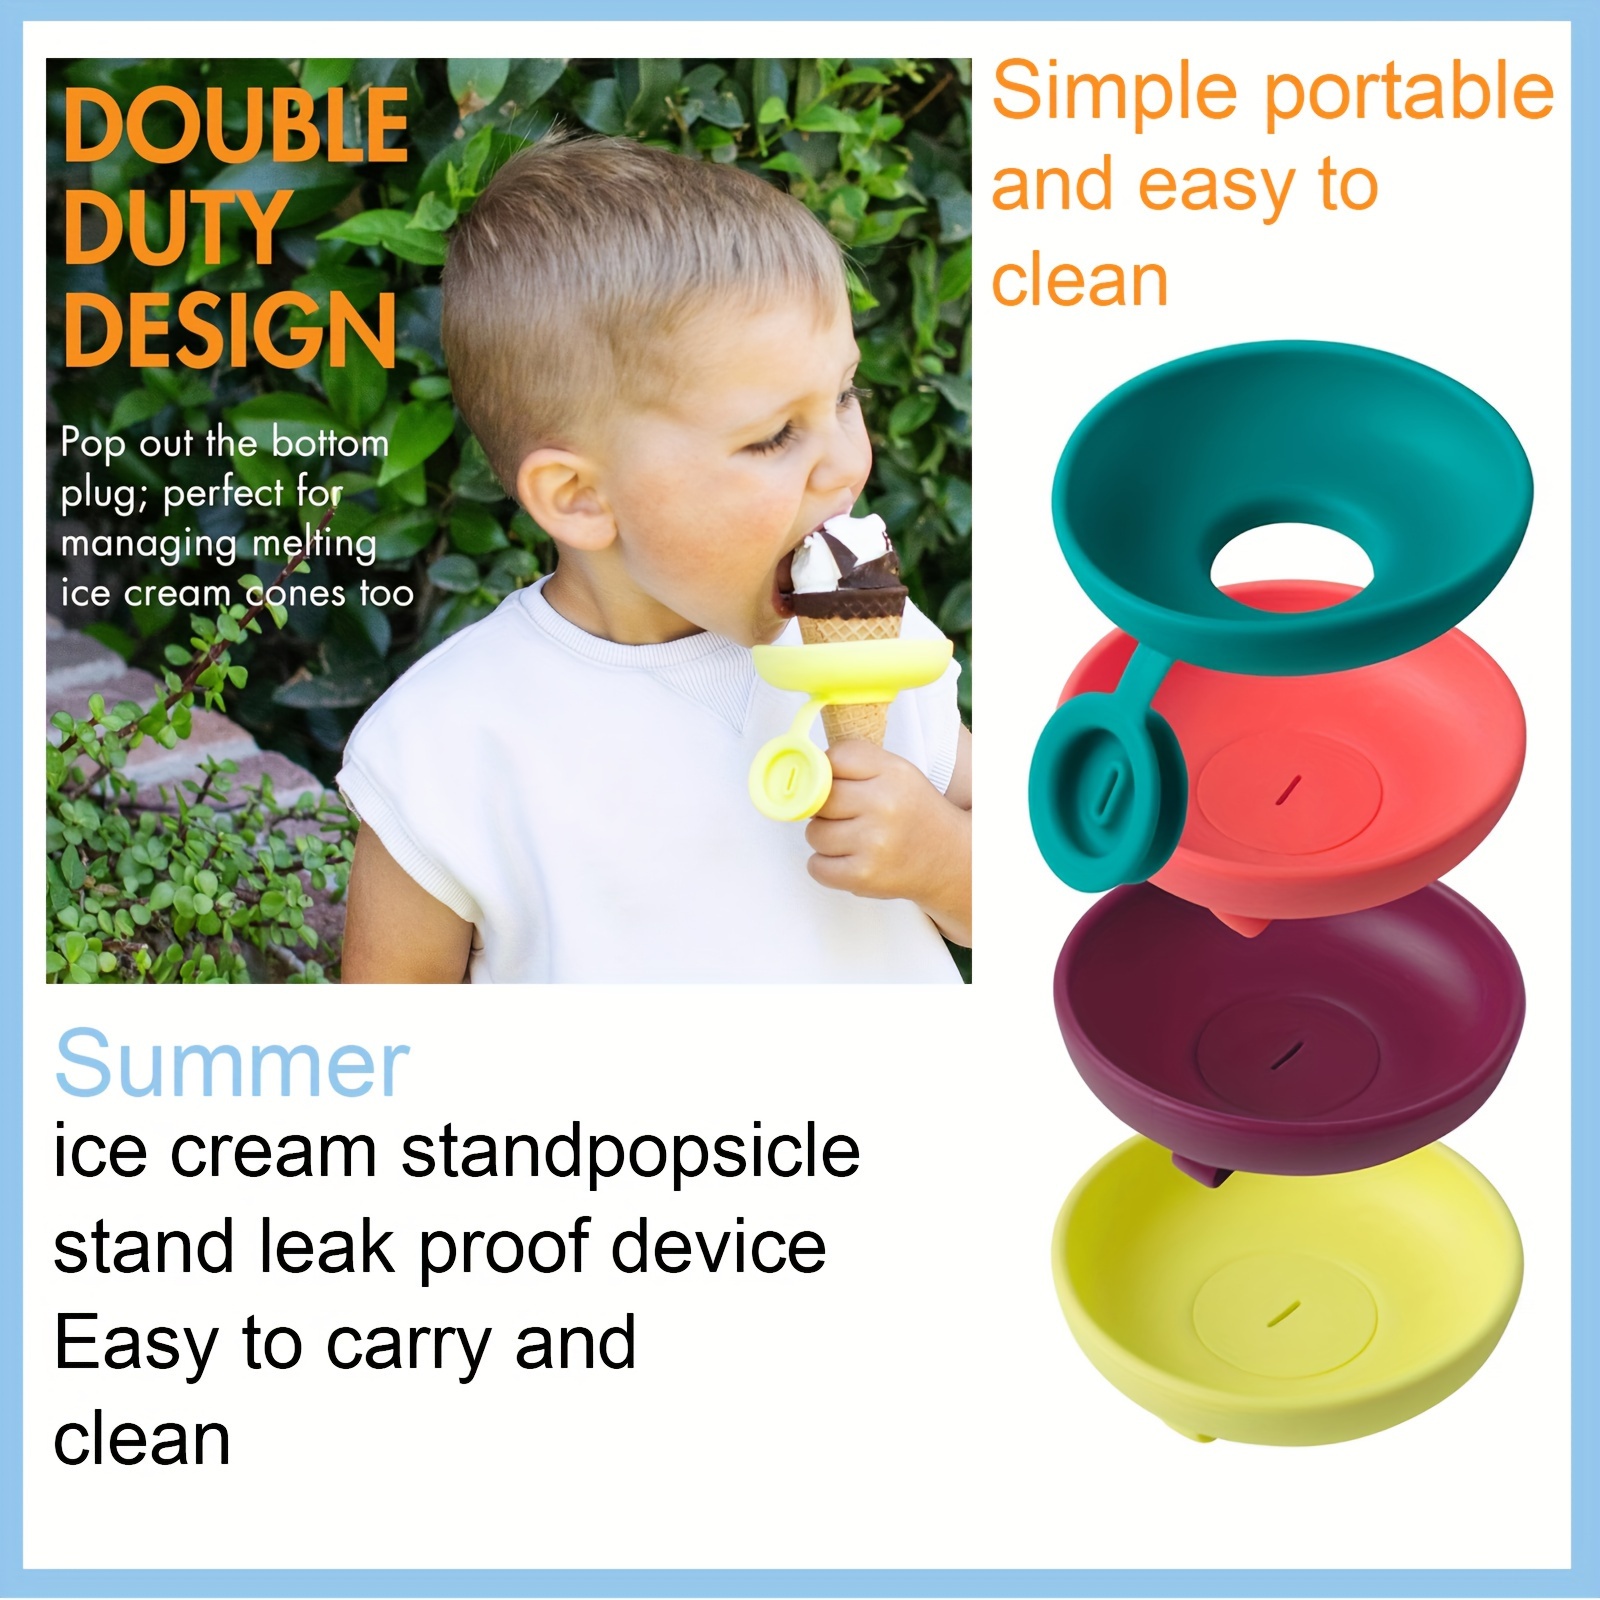 

Silicone Ice Cream Holder 1pc, Summer Popsicle Stand, Anti-leak Ice Cream Cone Support Device, Kids Portable Ice Lolly Mold Tray With Drip Guard